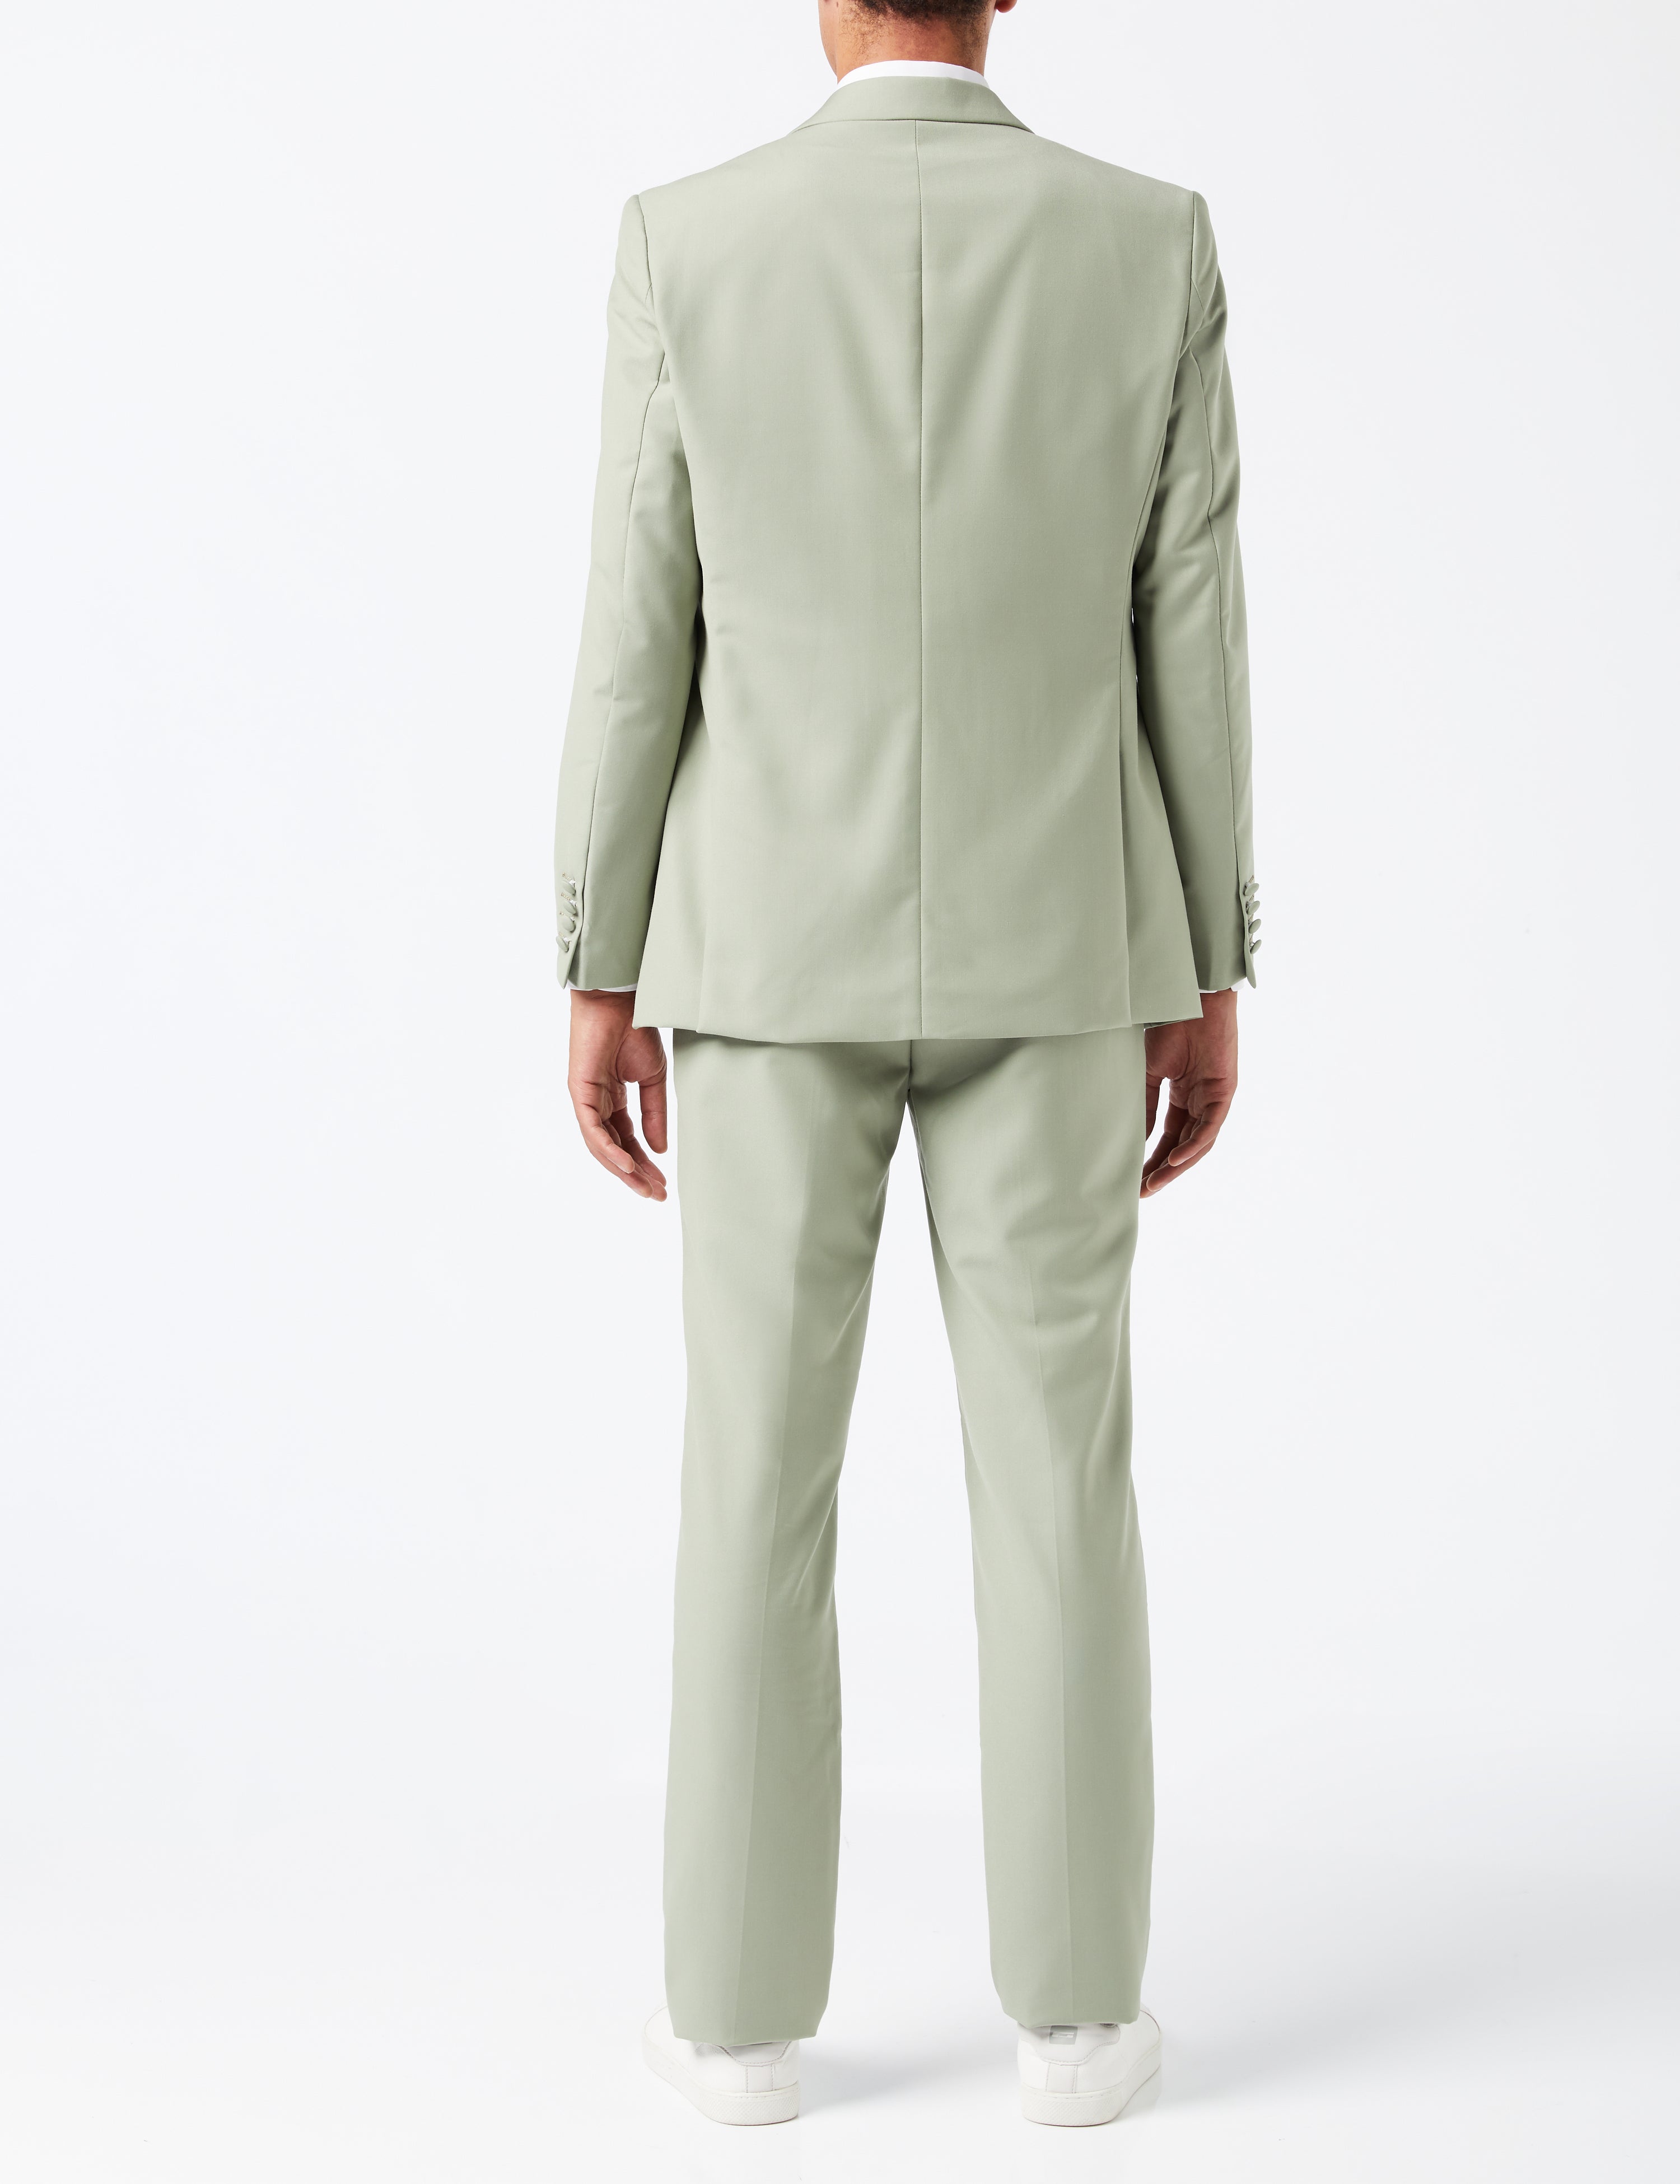 LETE - Pale Mint Green Summer Wedding Suit – XPOSED